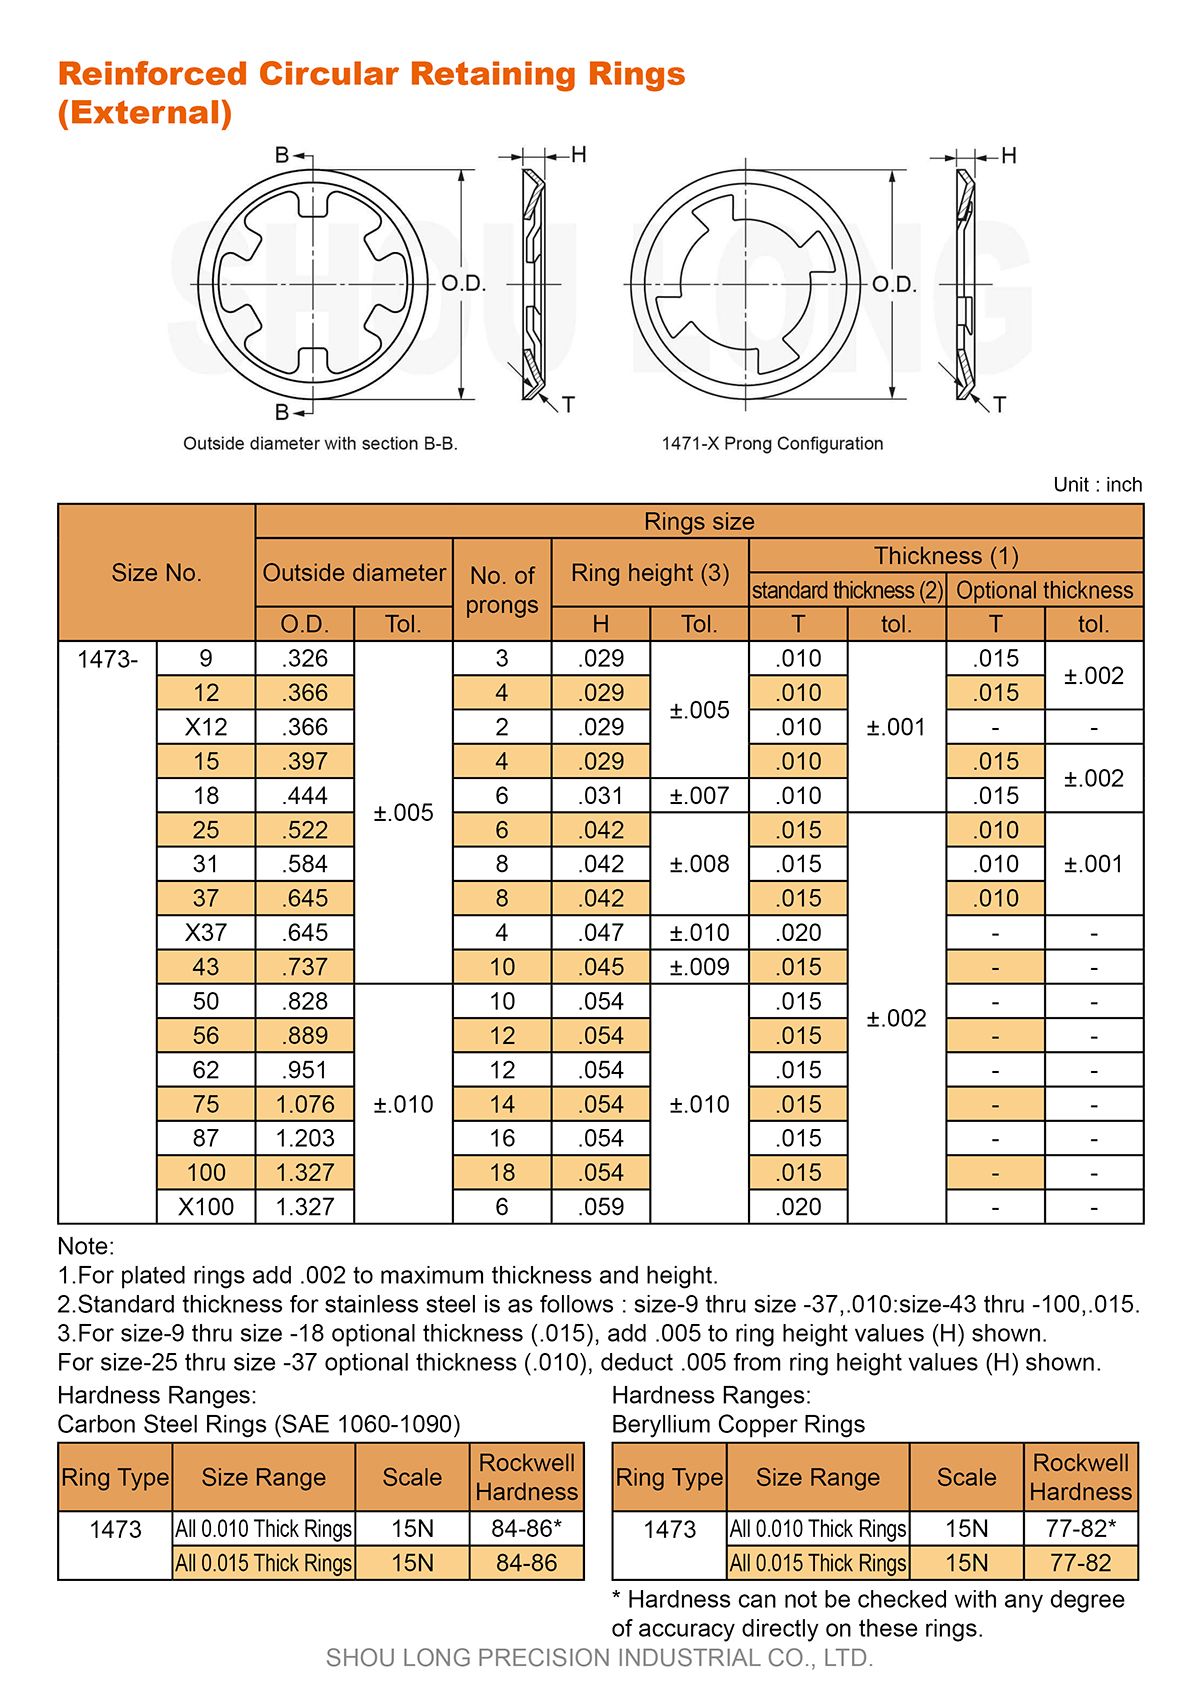 Spec of Inch Reinforced Circular Retaining Rings for Shaft